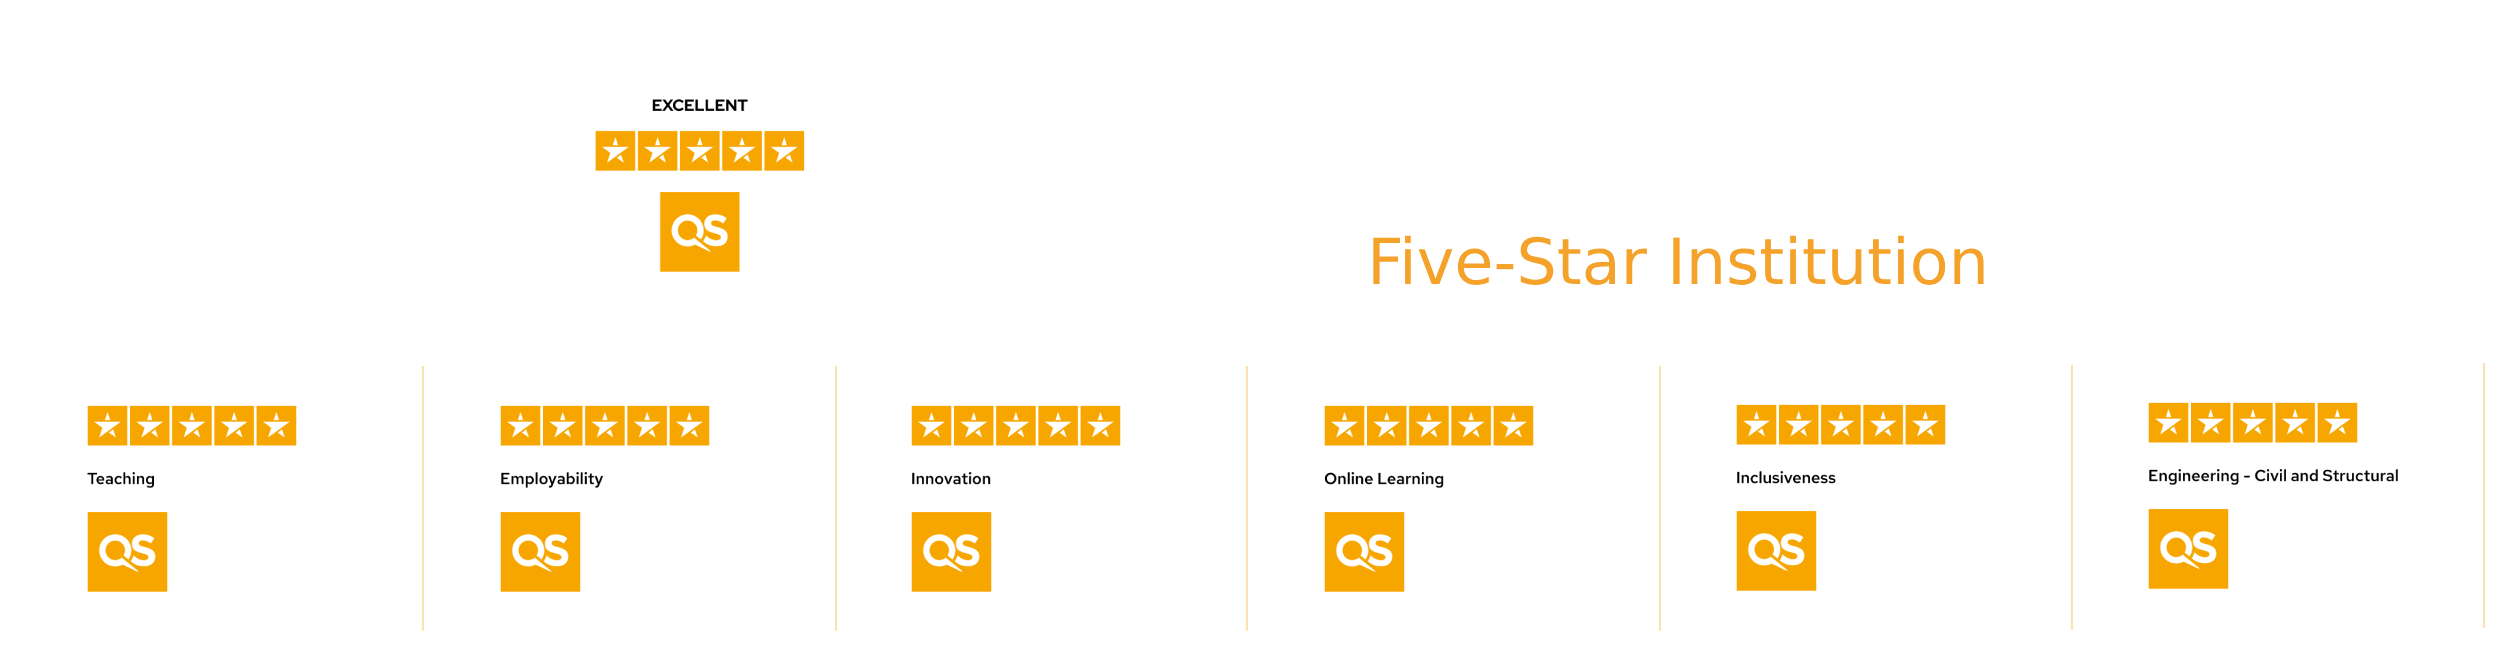 QS 5 Stars Rated for Excellence